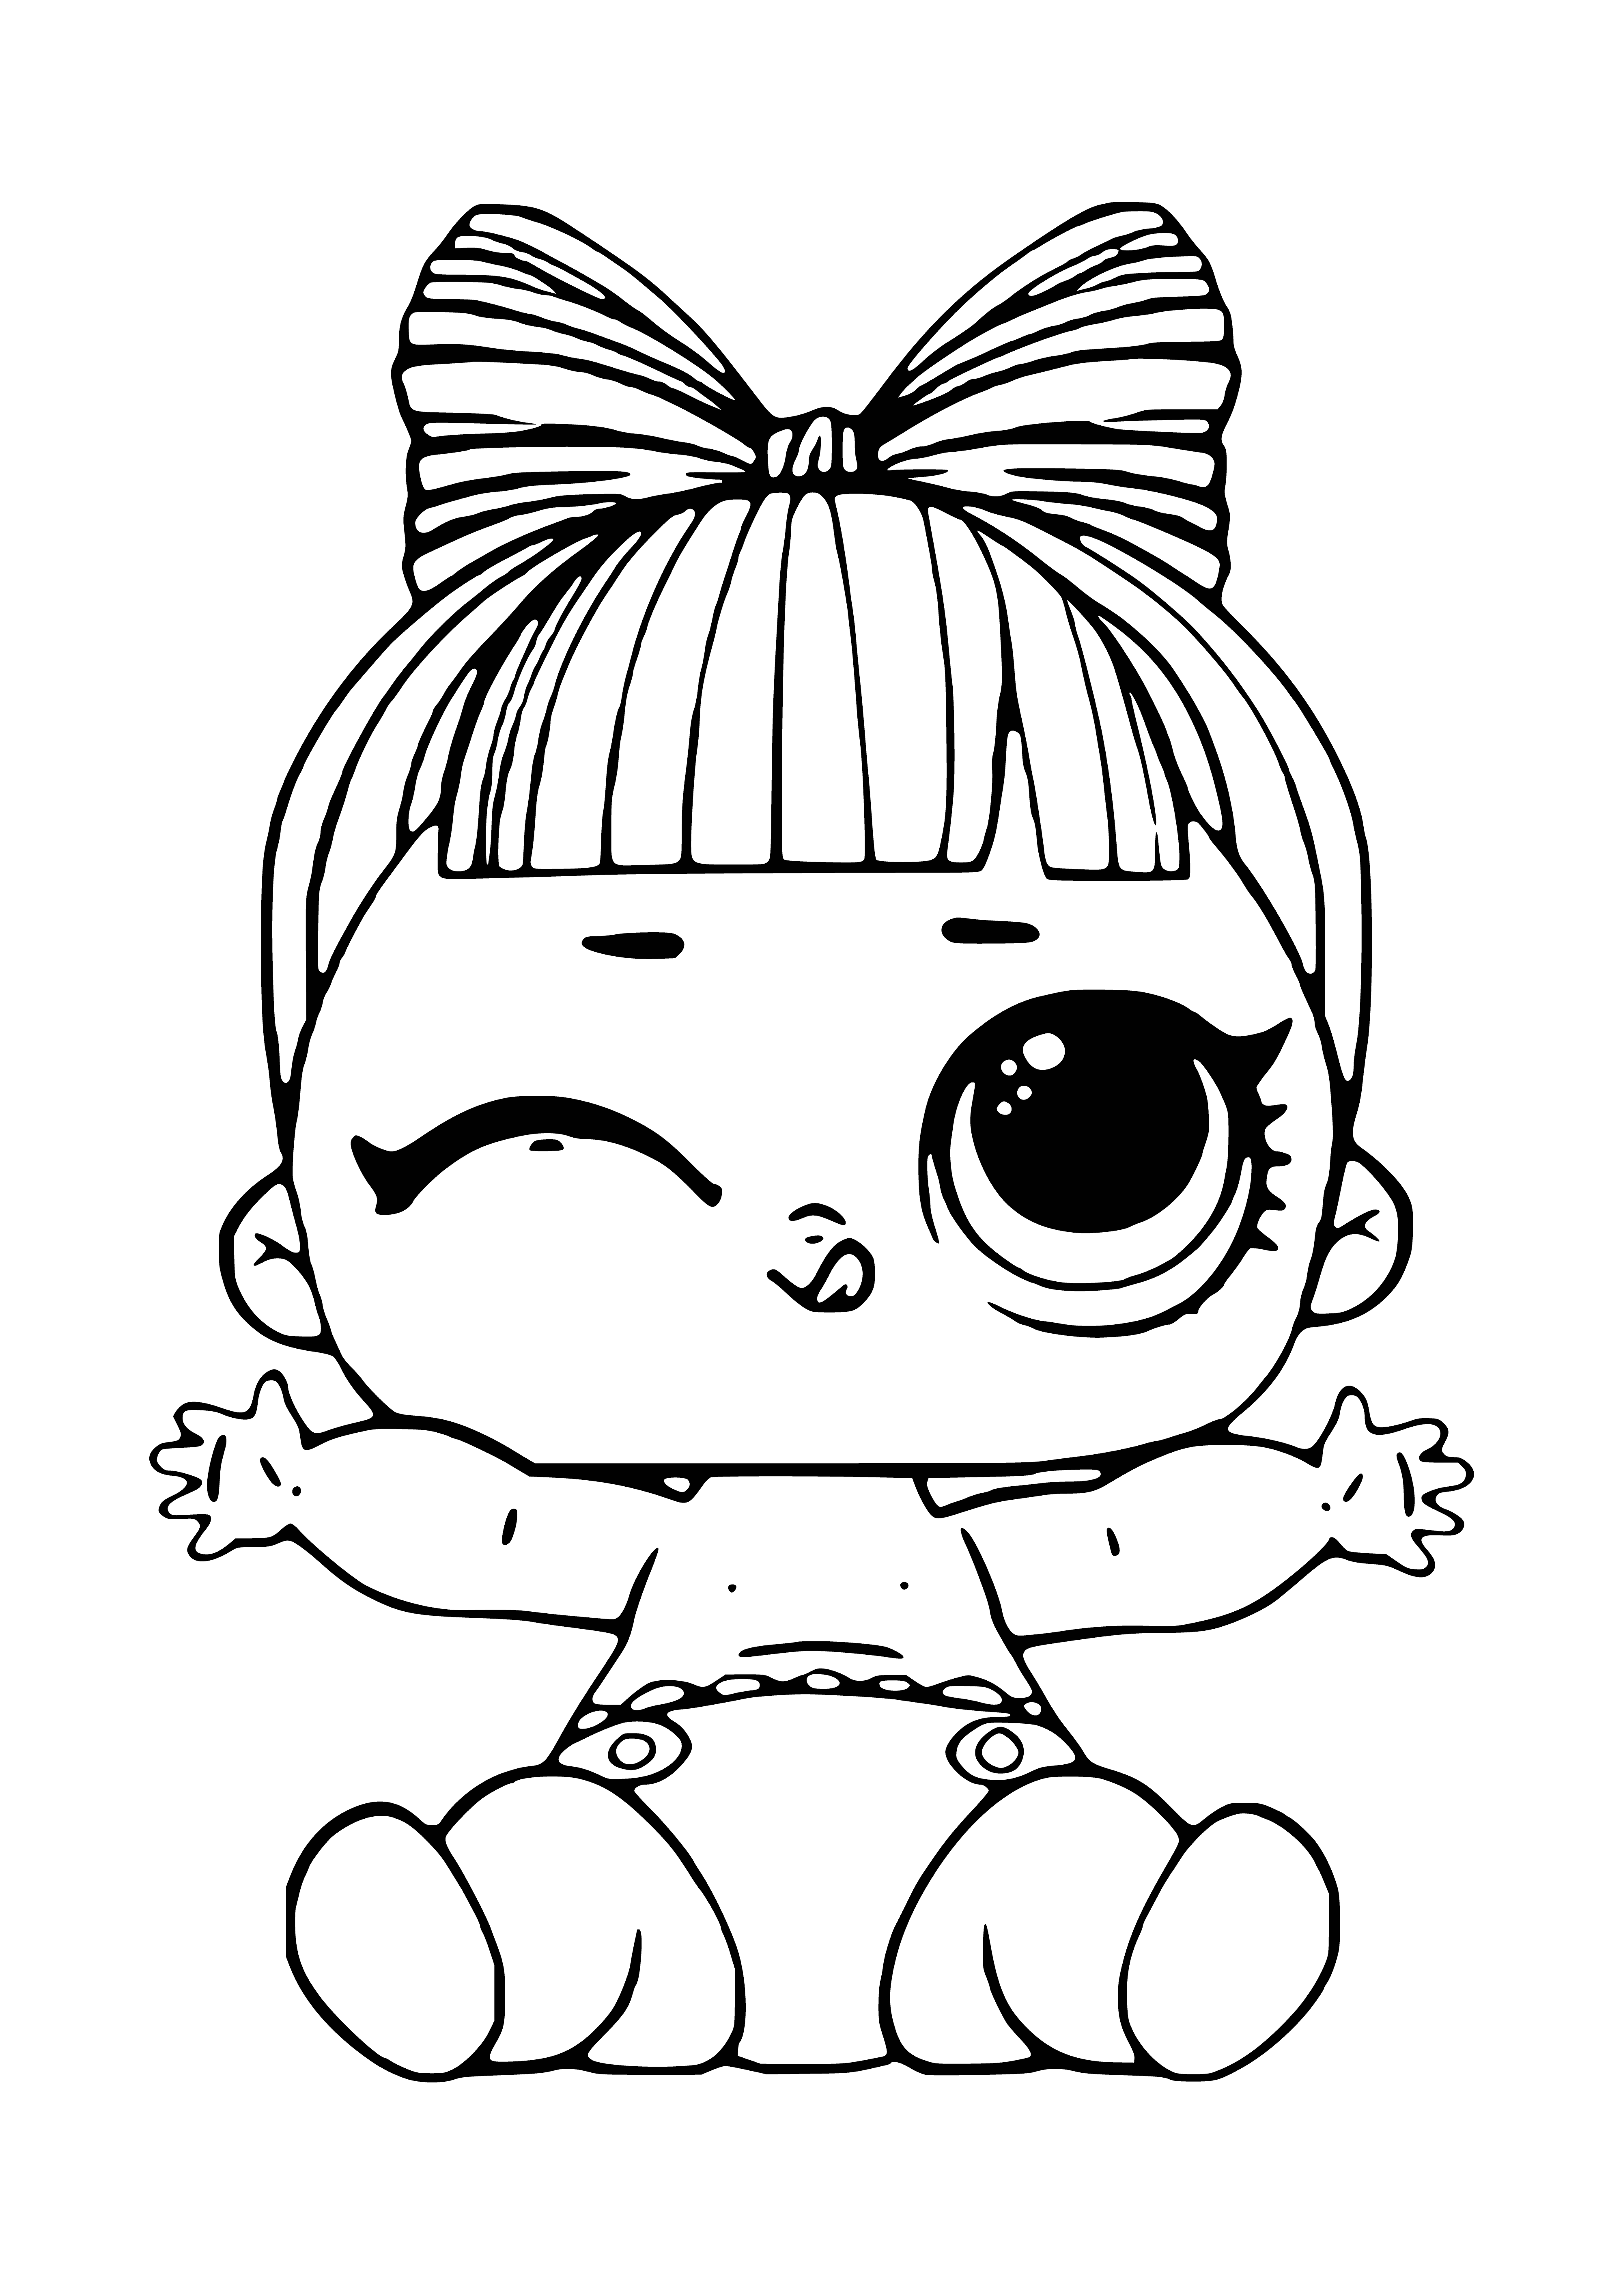 coloring page: Girl in pink dress hugging teddy bear tight. #Comforting